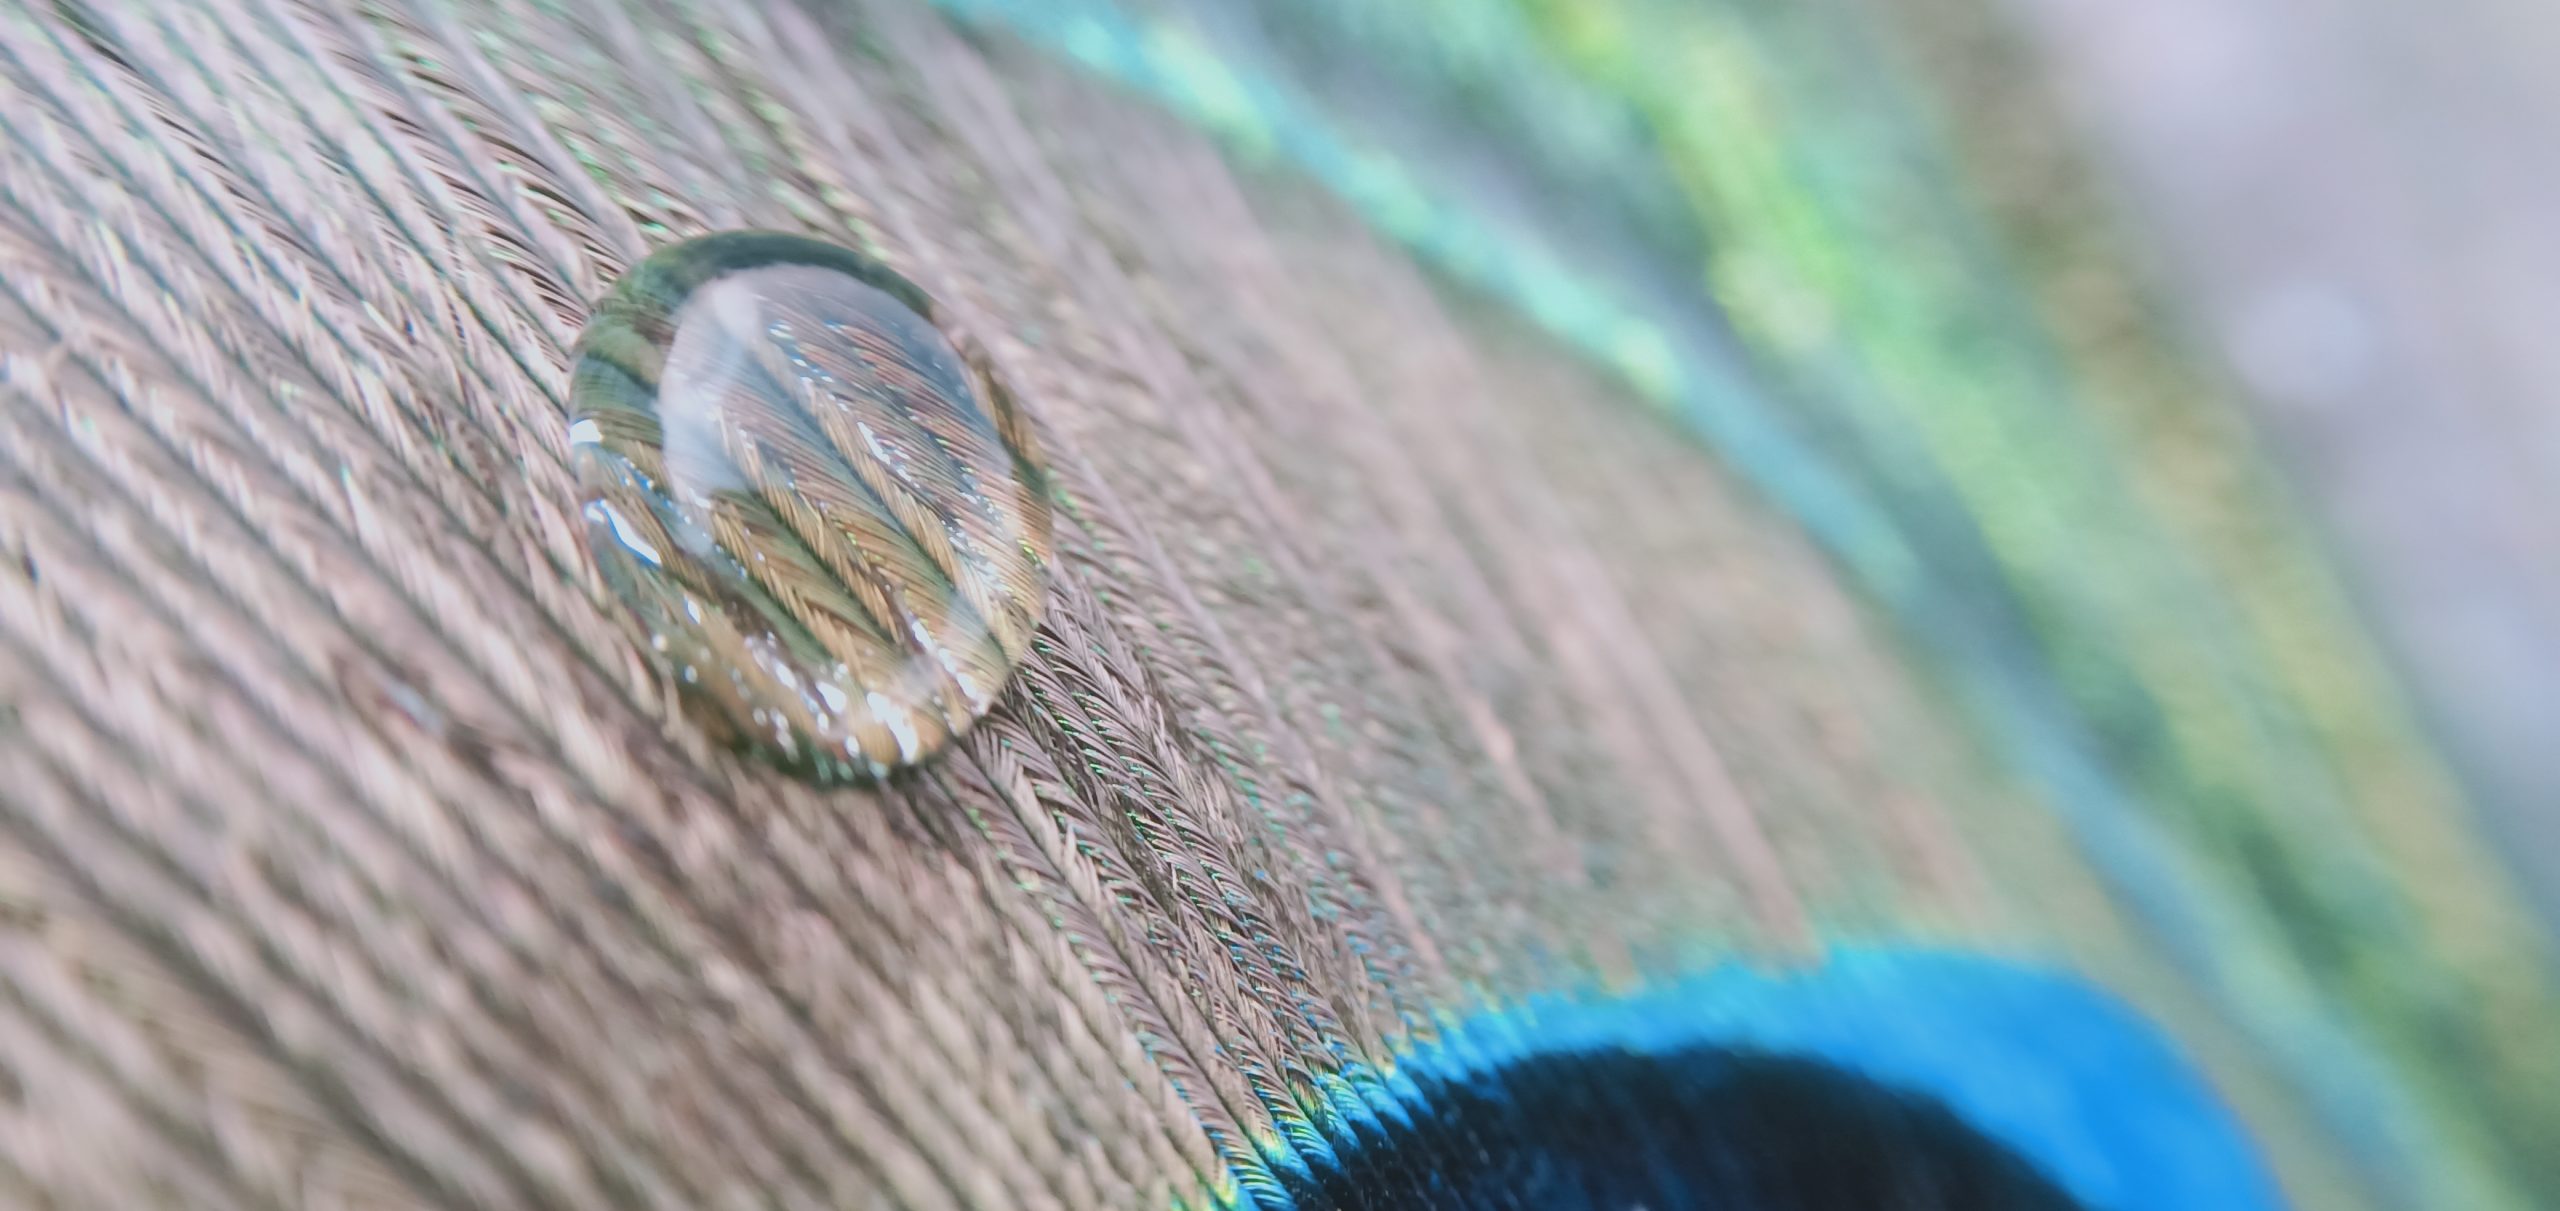 Waterdrops on a feather